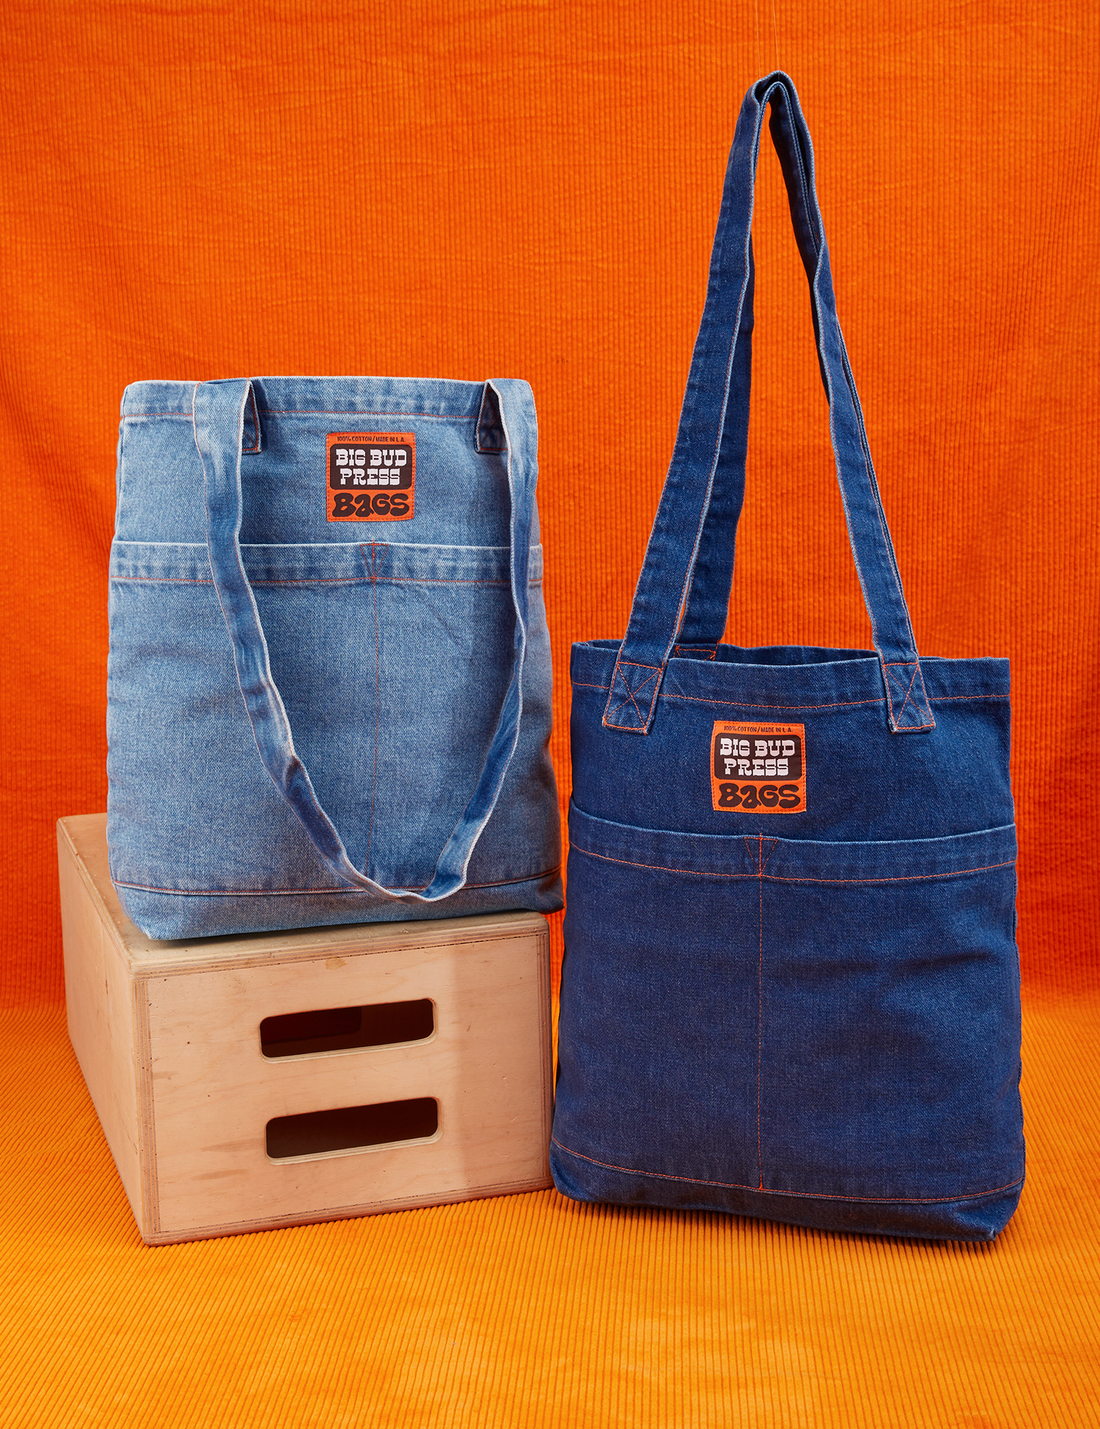 Denim Everyday Tote Bag in Light and Dark Washes